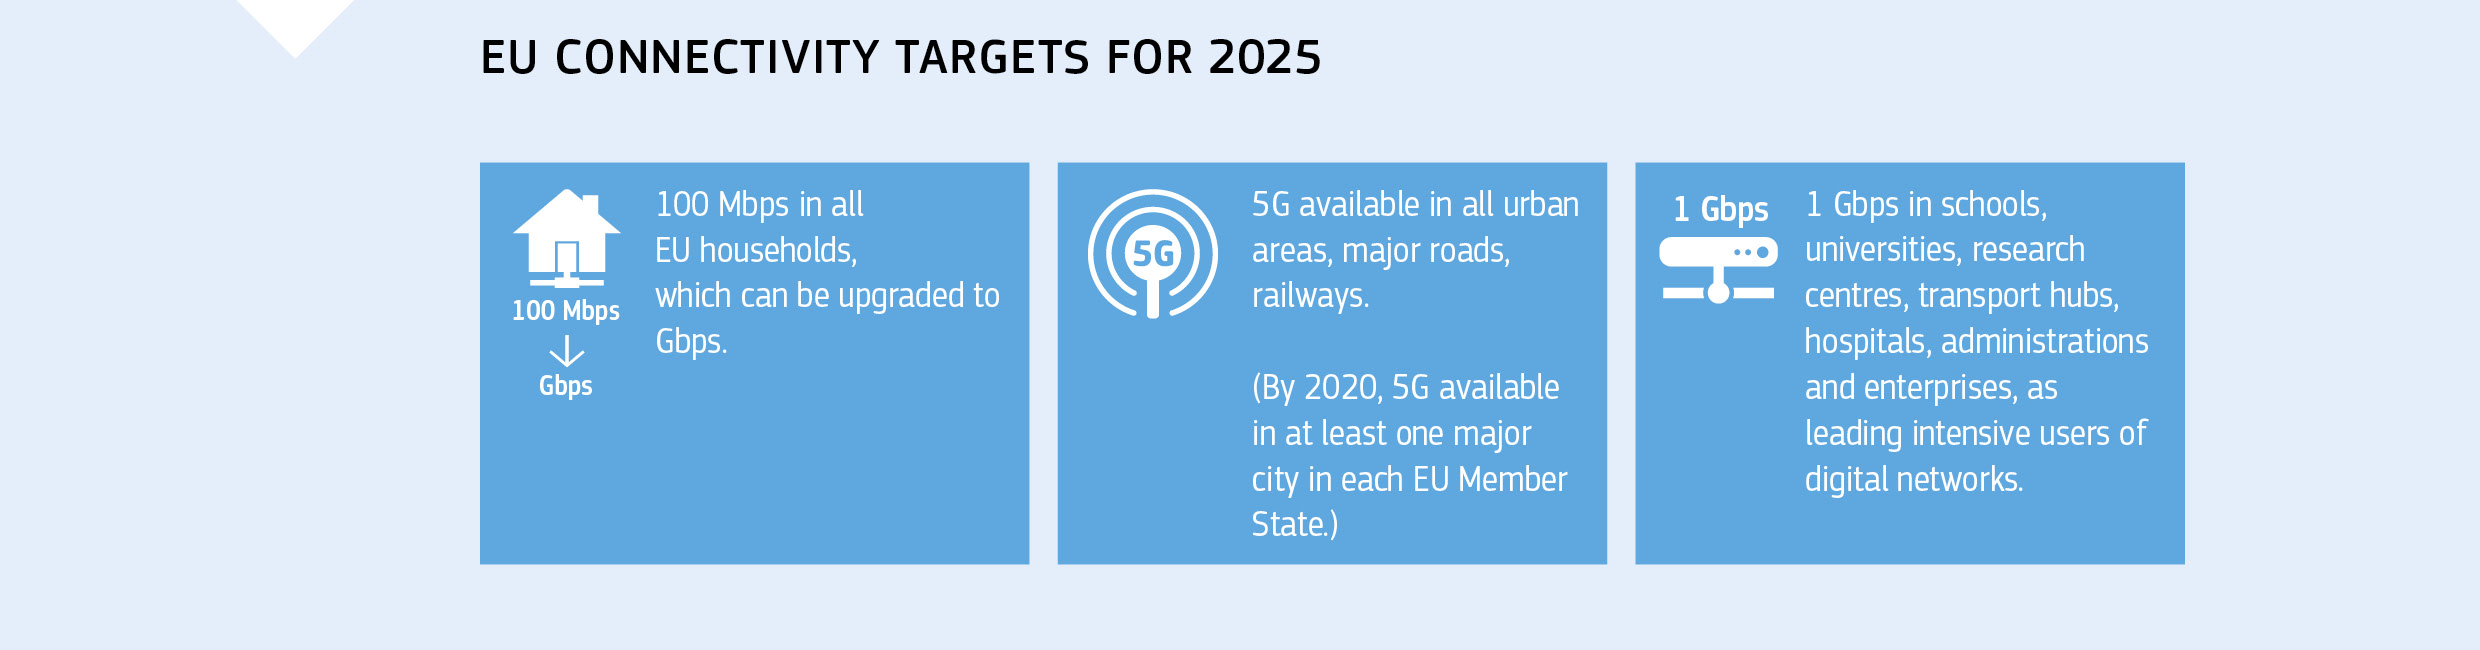 EU CONNECTIVITY TARGETS FOR 2025